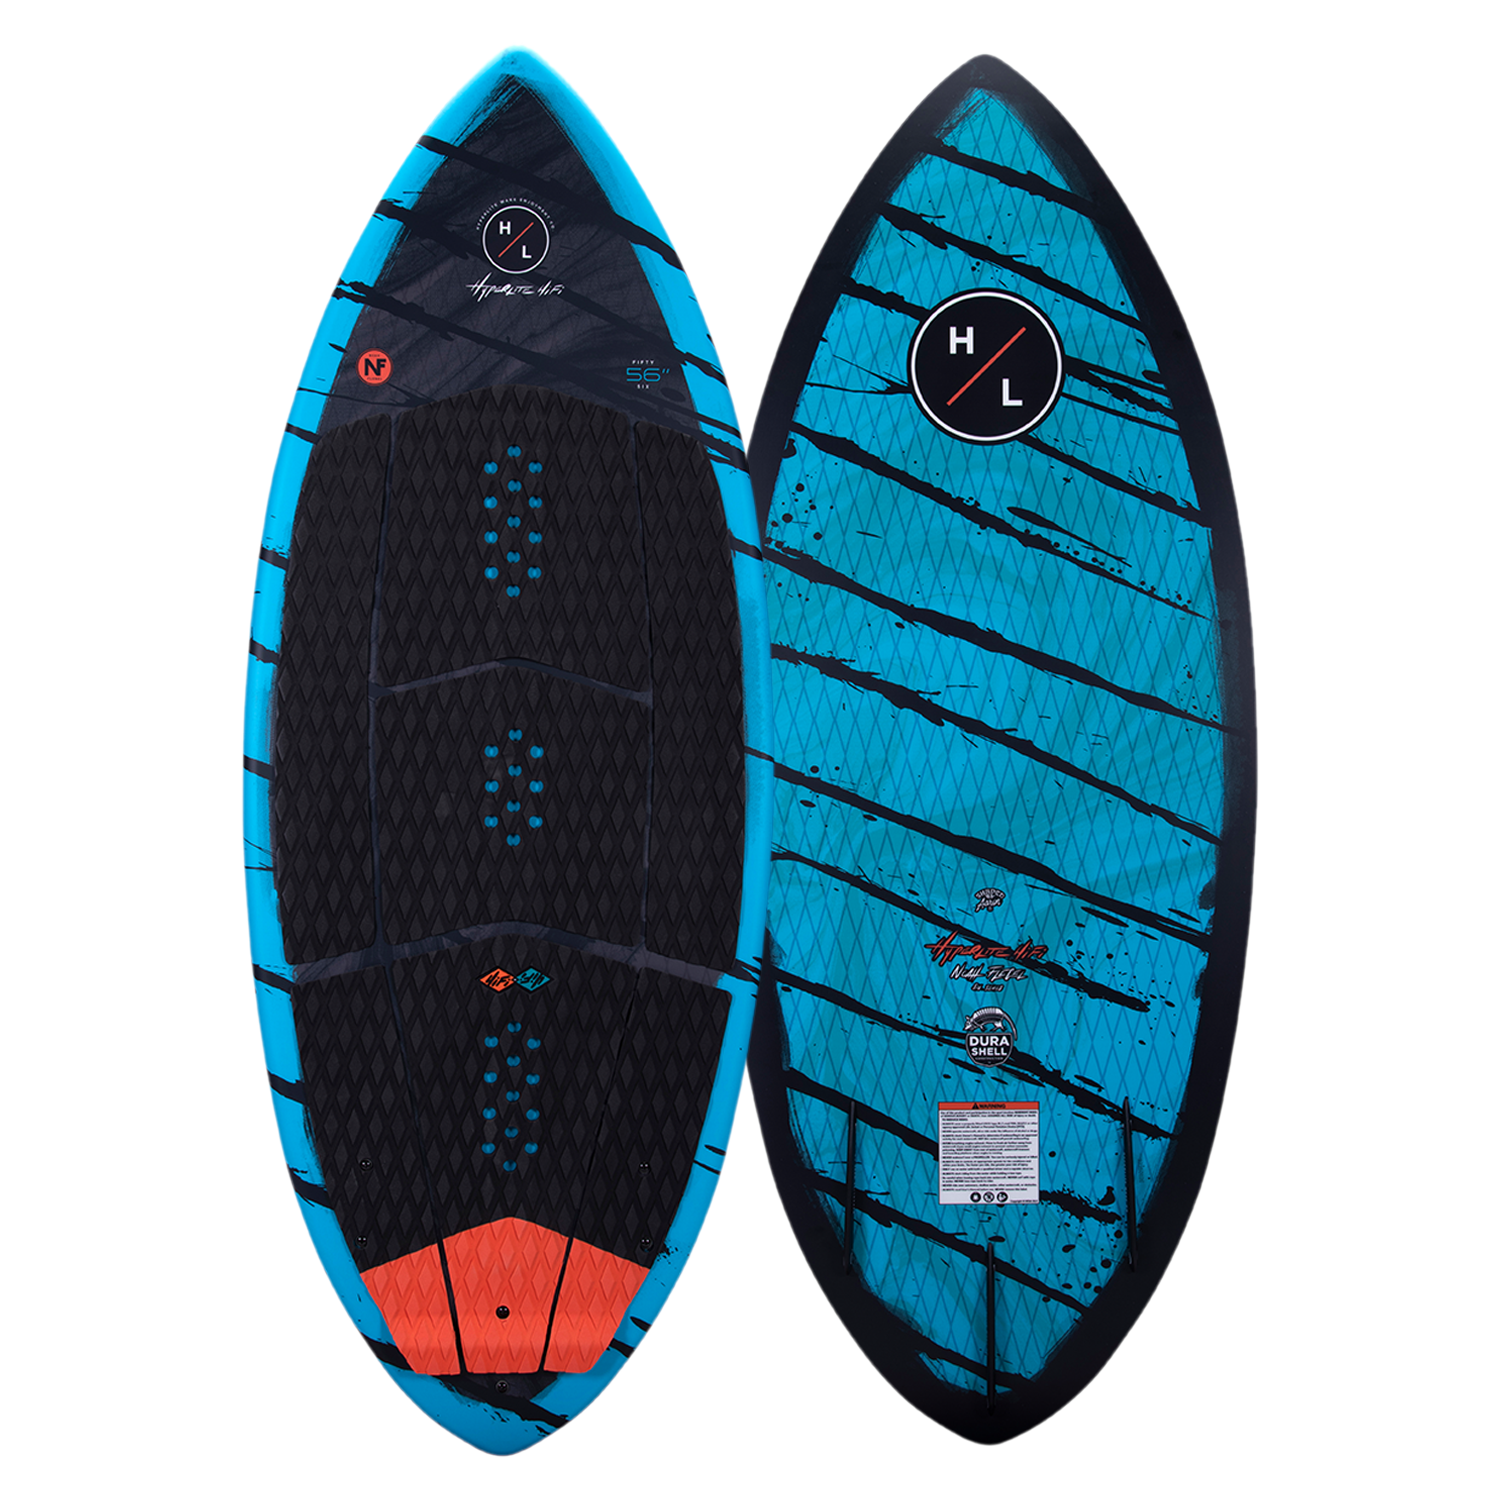 A Hyperlite 2023 Hi-Fi Wakesurf Board with a blue and black design featuring DuraShell construction.